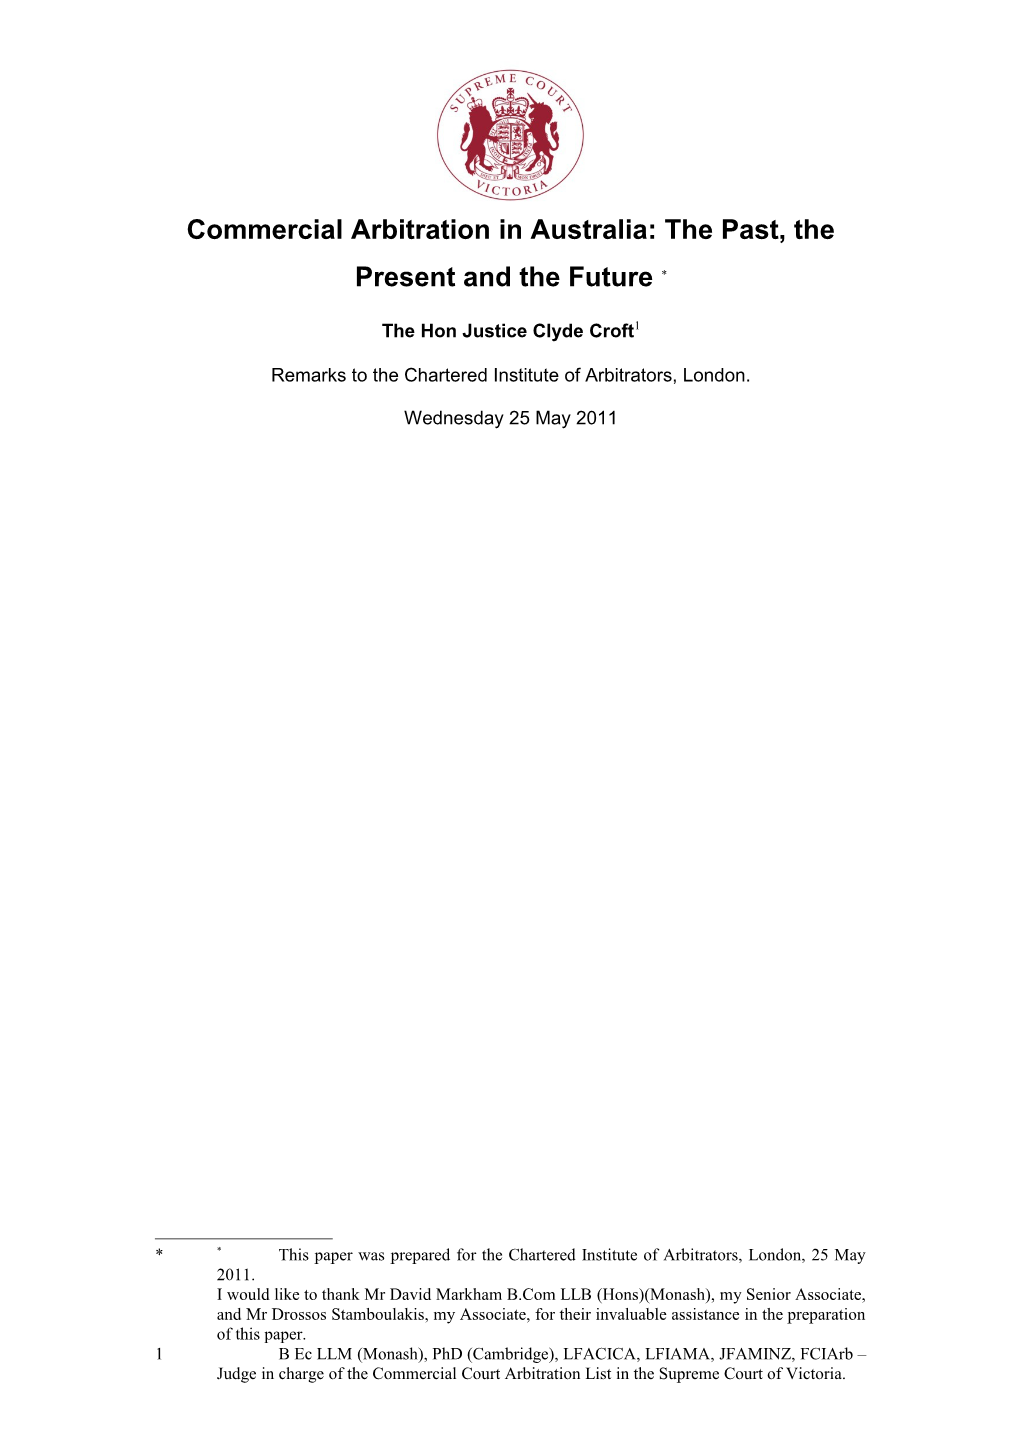 Commercial Arbitration in Australia: the Past, the Present and the Future *